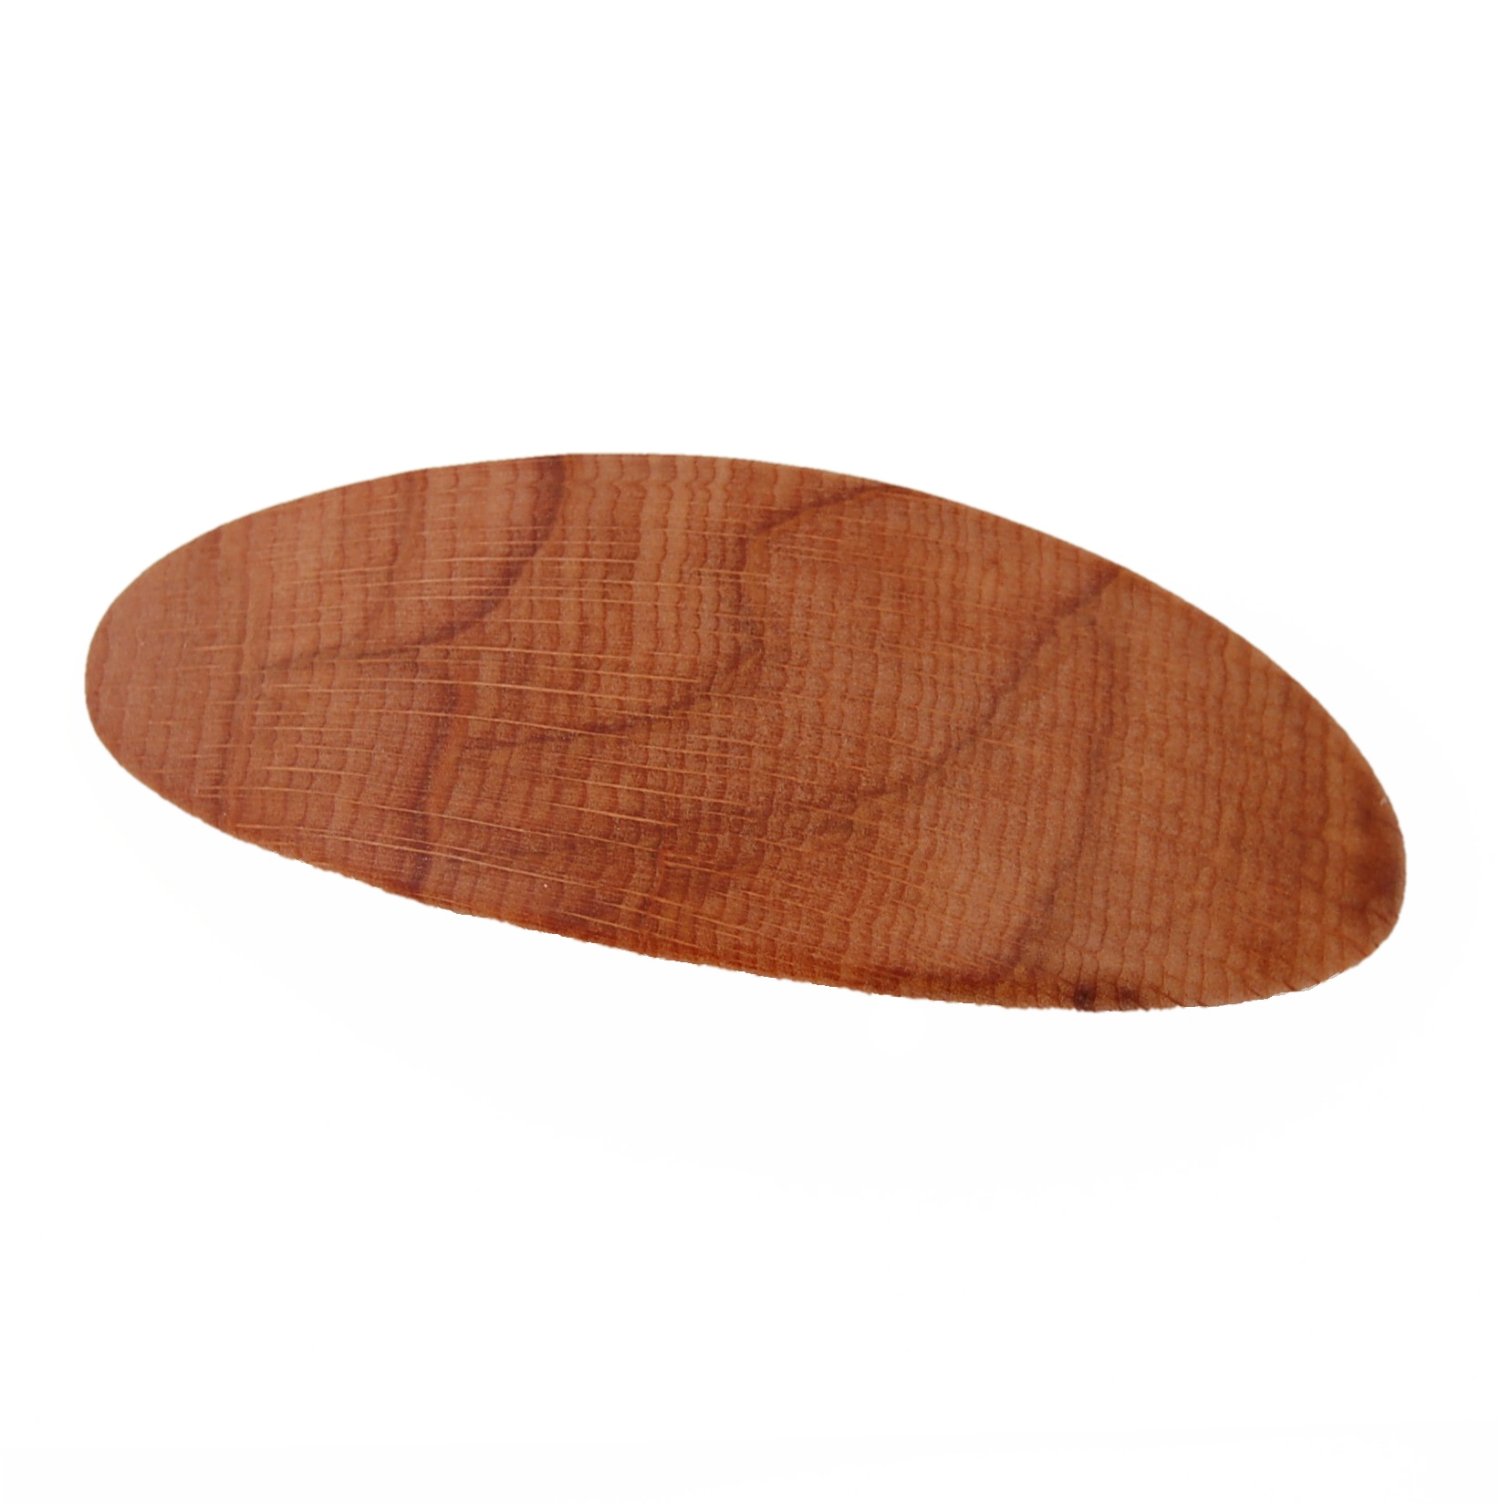 stylish wooden hair clip made of beech wood